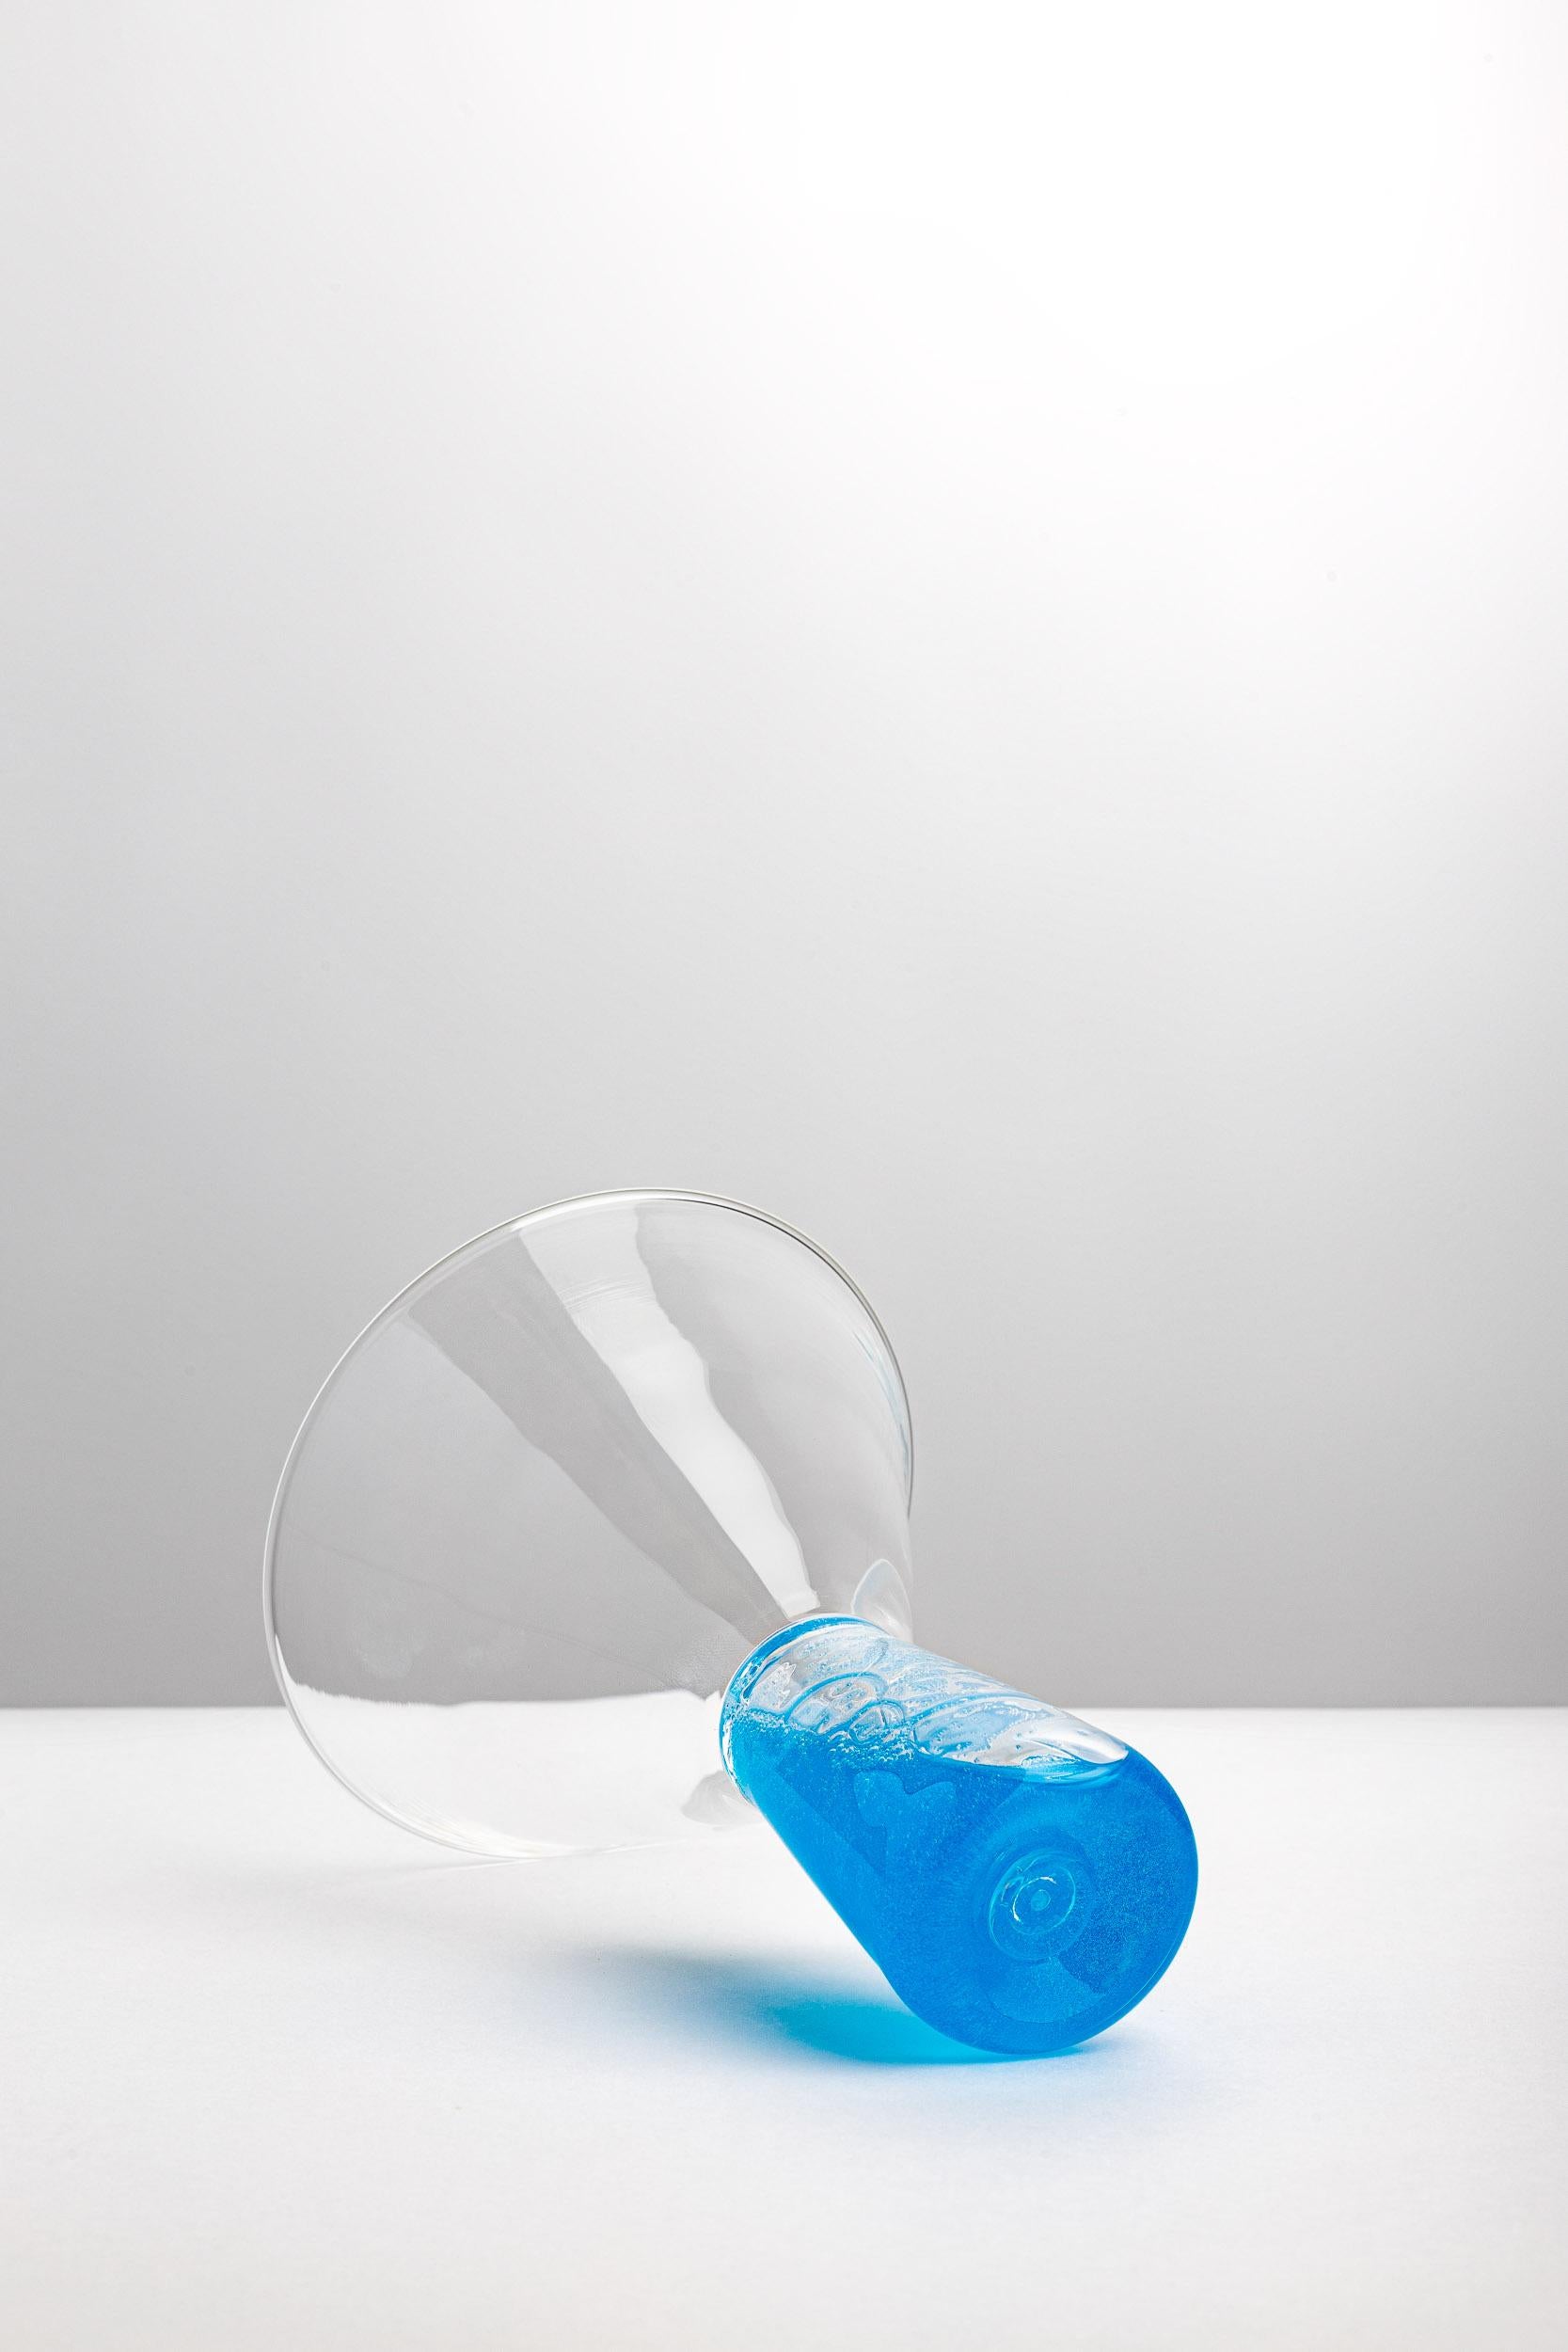 Blue Murano Glass Martini Cup, VELENI by L+W, 2022 - Limited Edition collectible In New Condition For Sale In Milan, IT